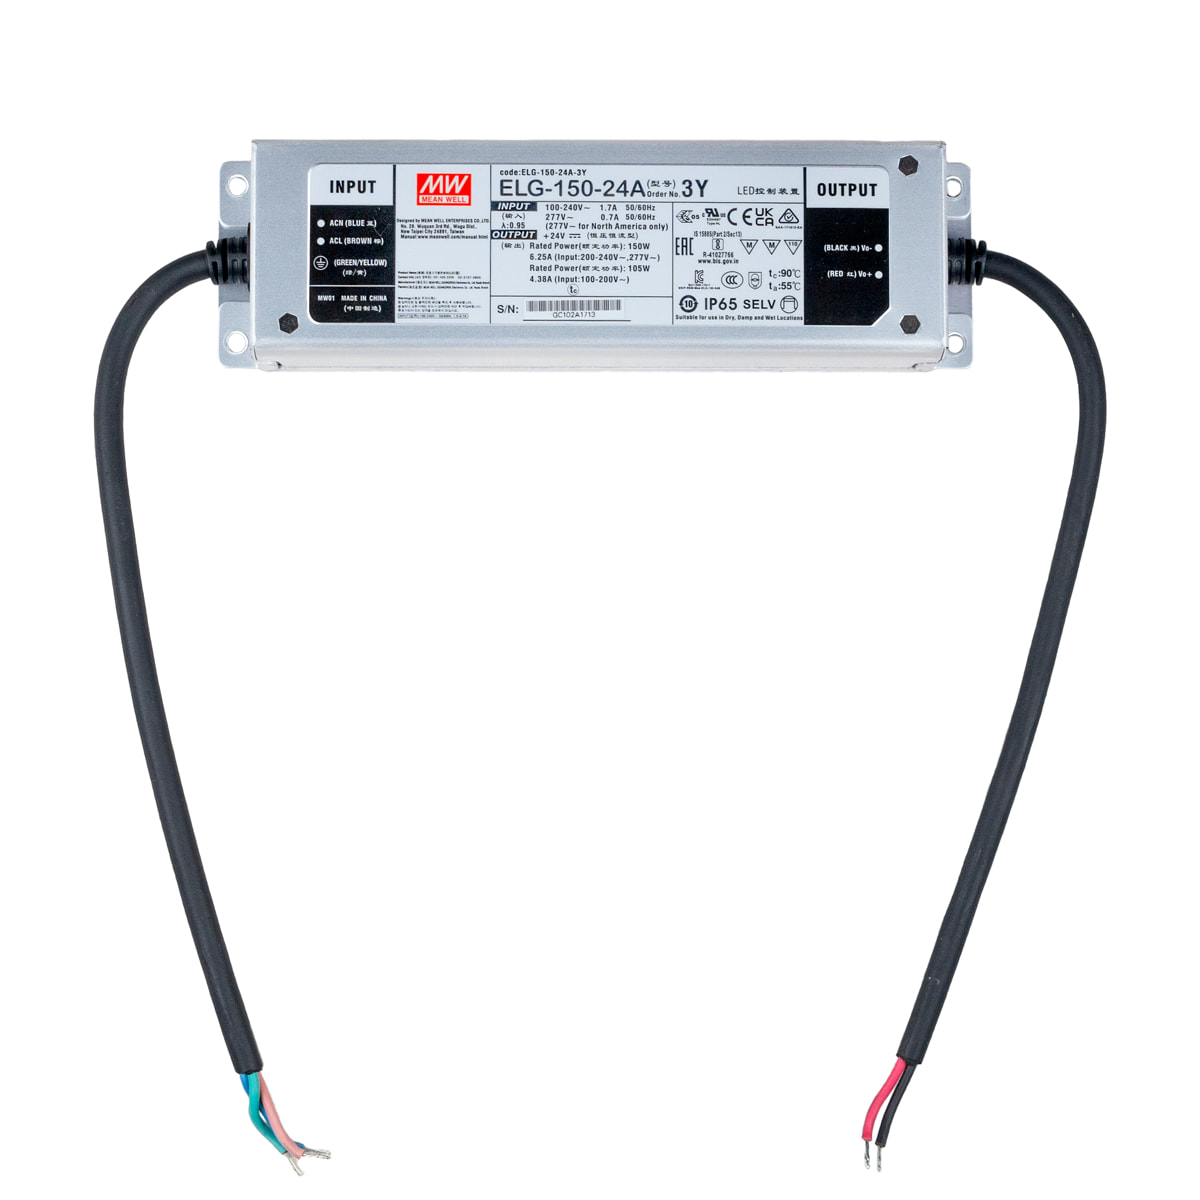 A 150W LED driver is shown with four visible mounting holes to allow it to be mounted out of the way on a flat surface or custom fabricated mounting bracket